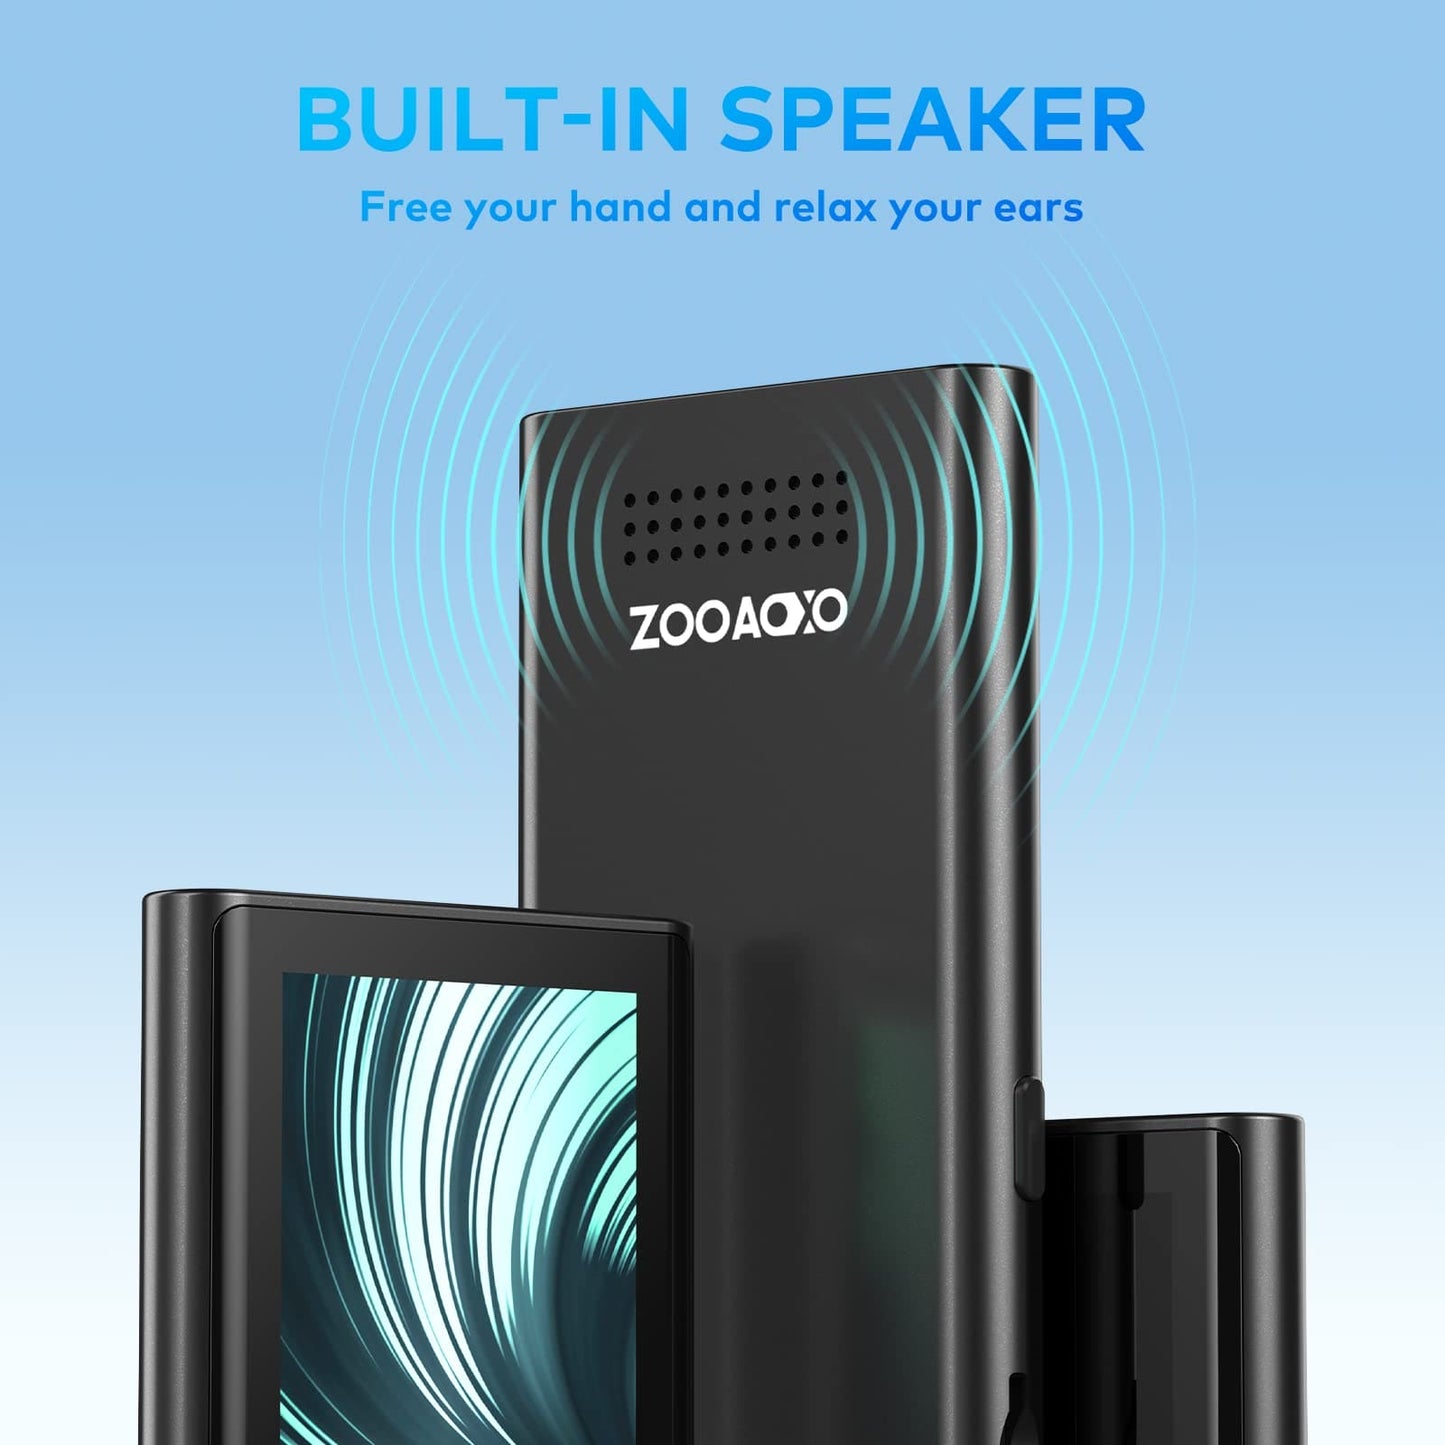 128GB MP3 Player, ZOOAOXO Music Player with Bluetooth 5.2, Built-in HD Speaker, FM Radio, Voice Recorder, Mini Design, Weigh 2.4 oz, HiFi Sound, Ideal for Sport, Earphones Included